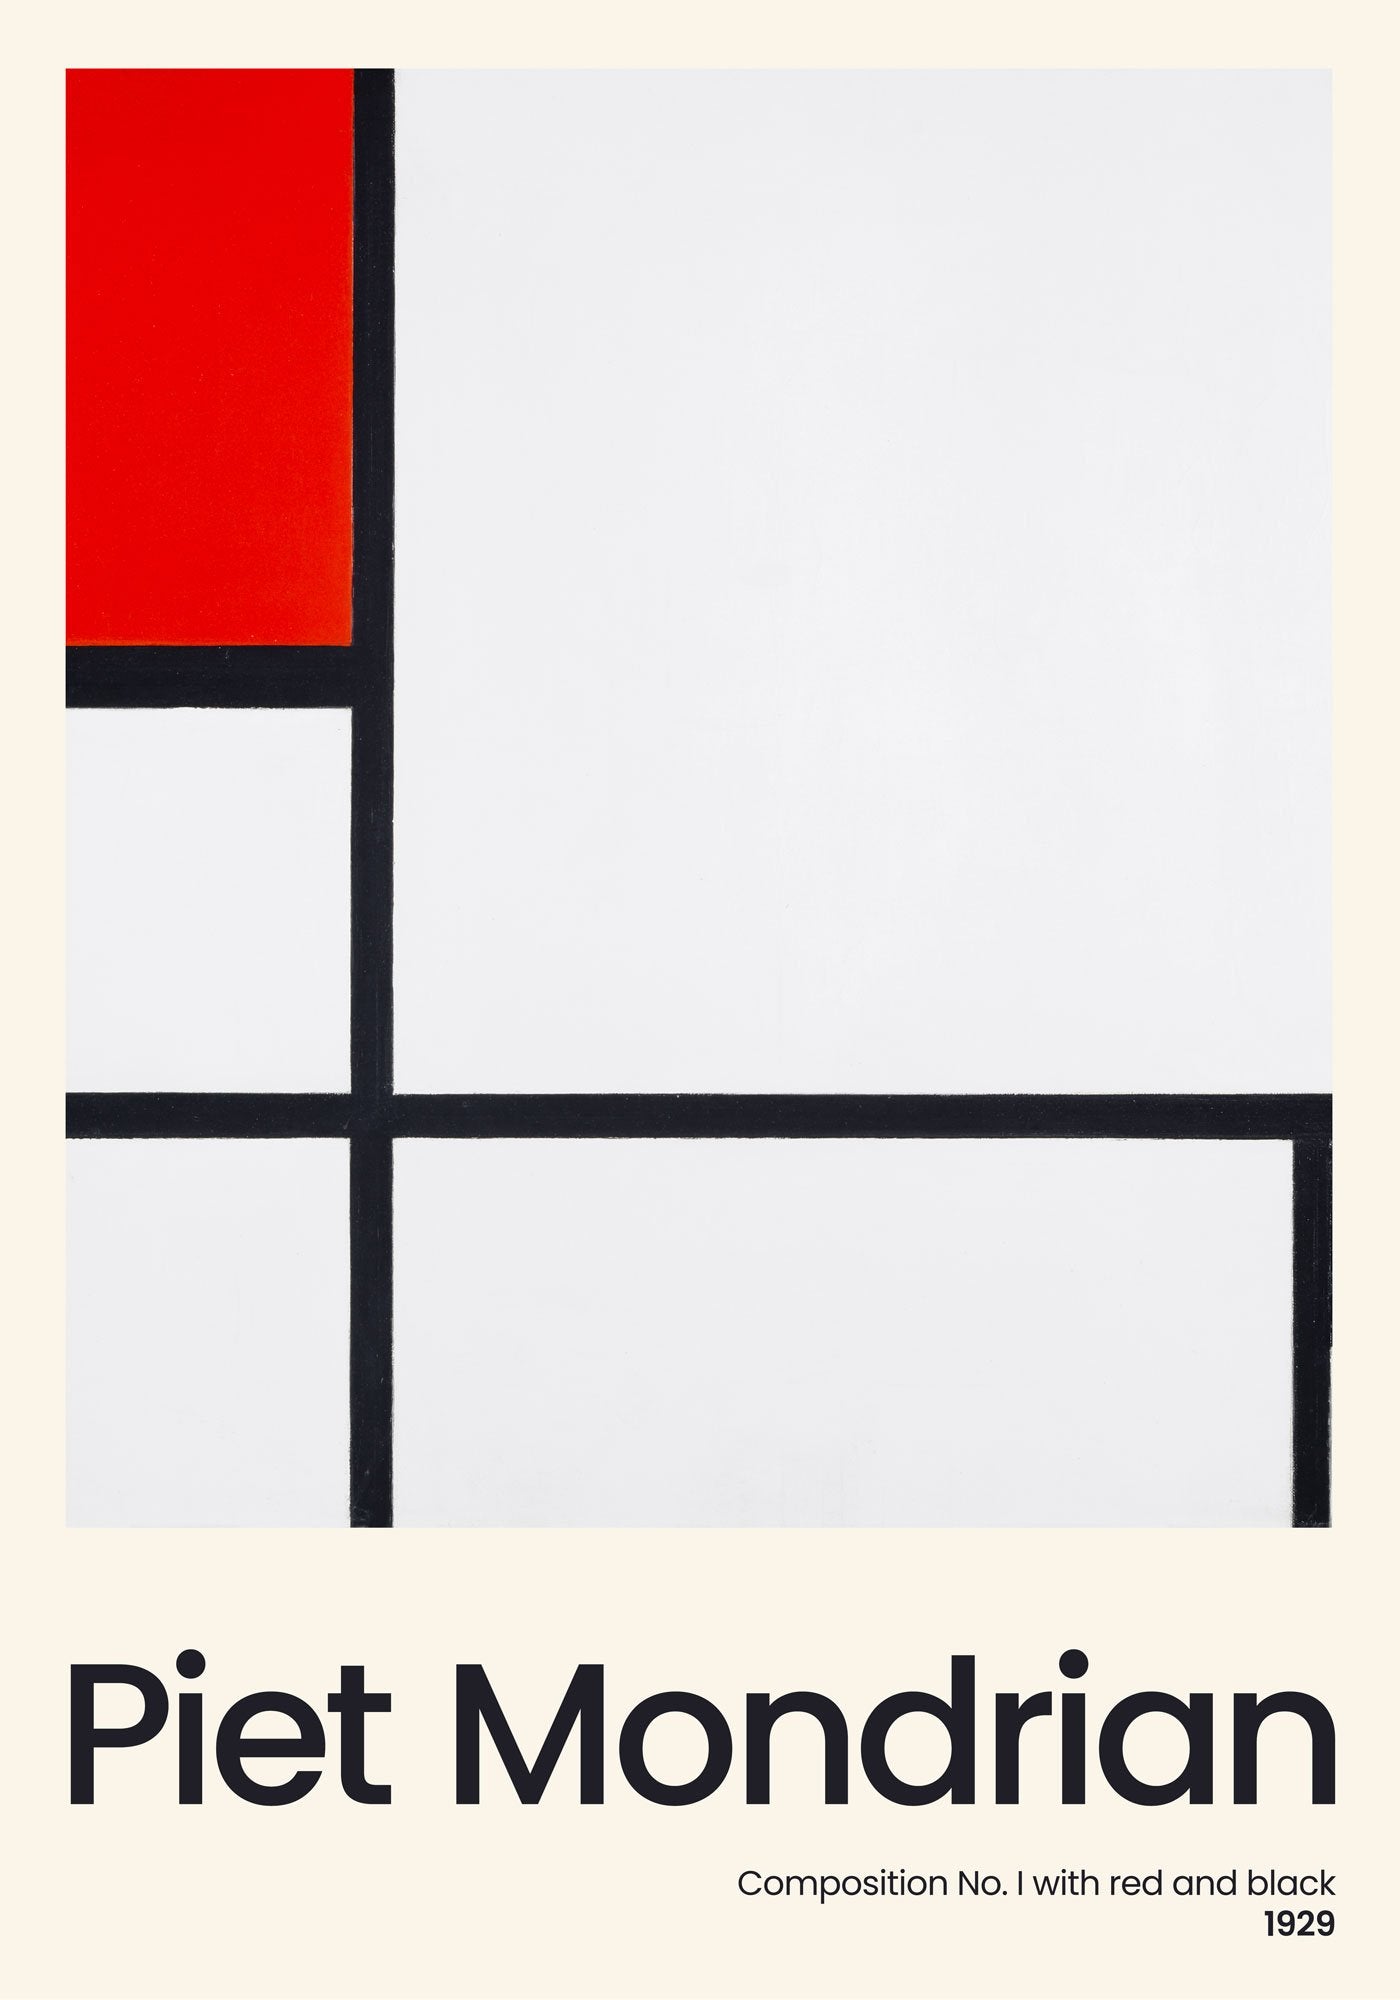 Composition No. 1 with red and black by Piet Mondrian Exhibition Poster